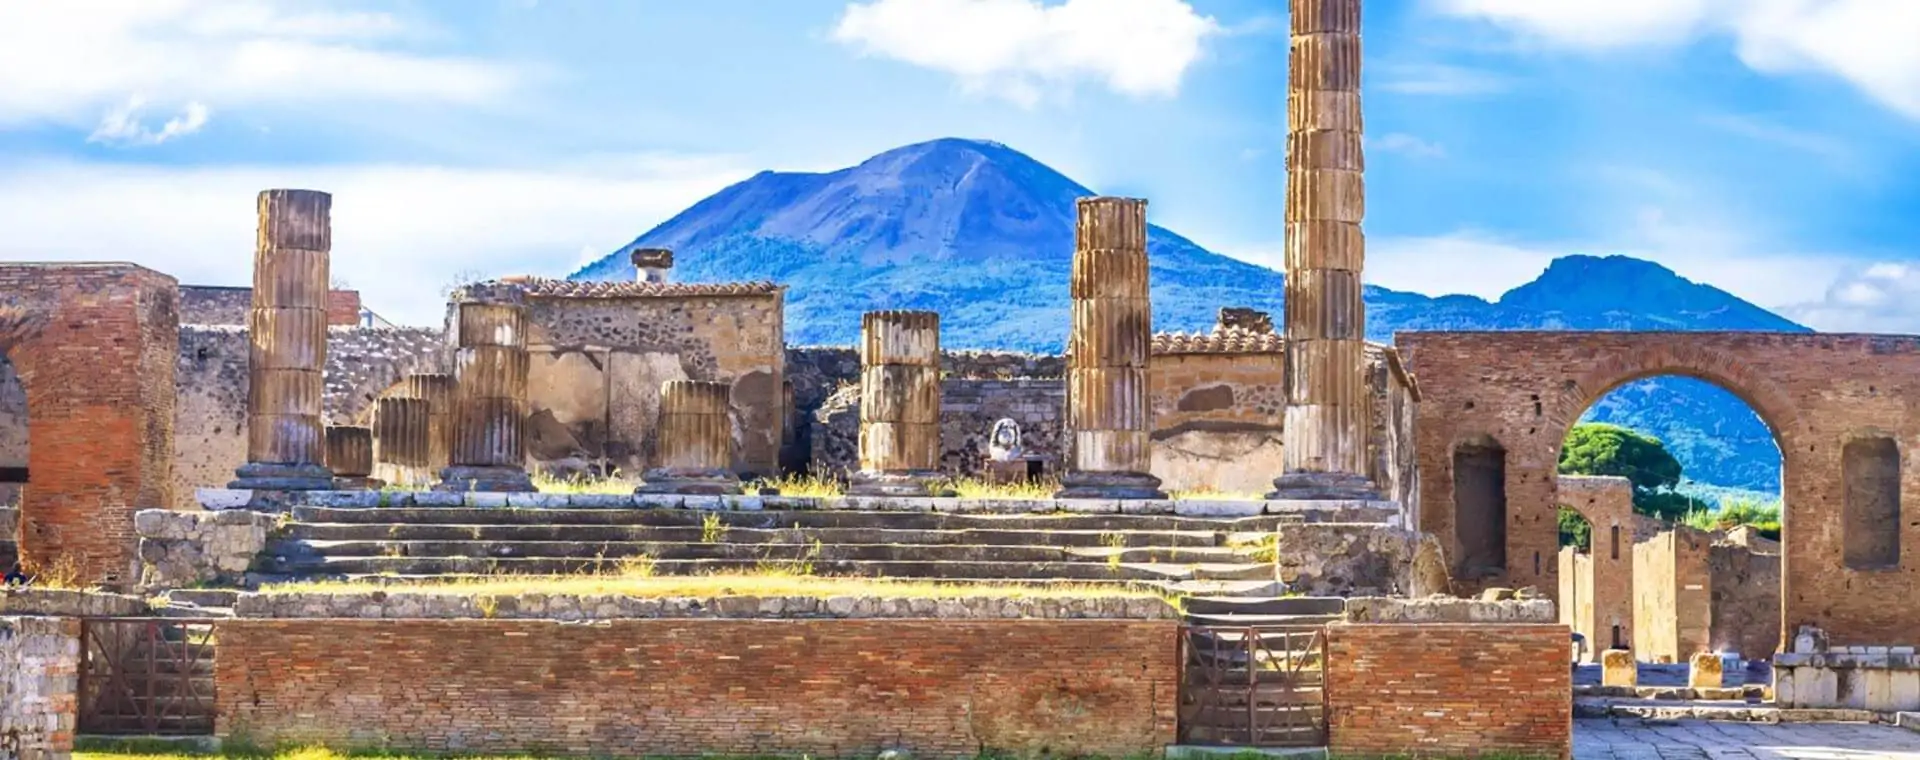 Why is Pompeii famous?